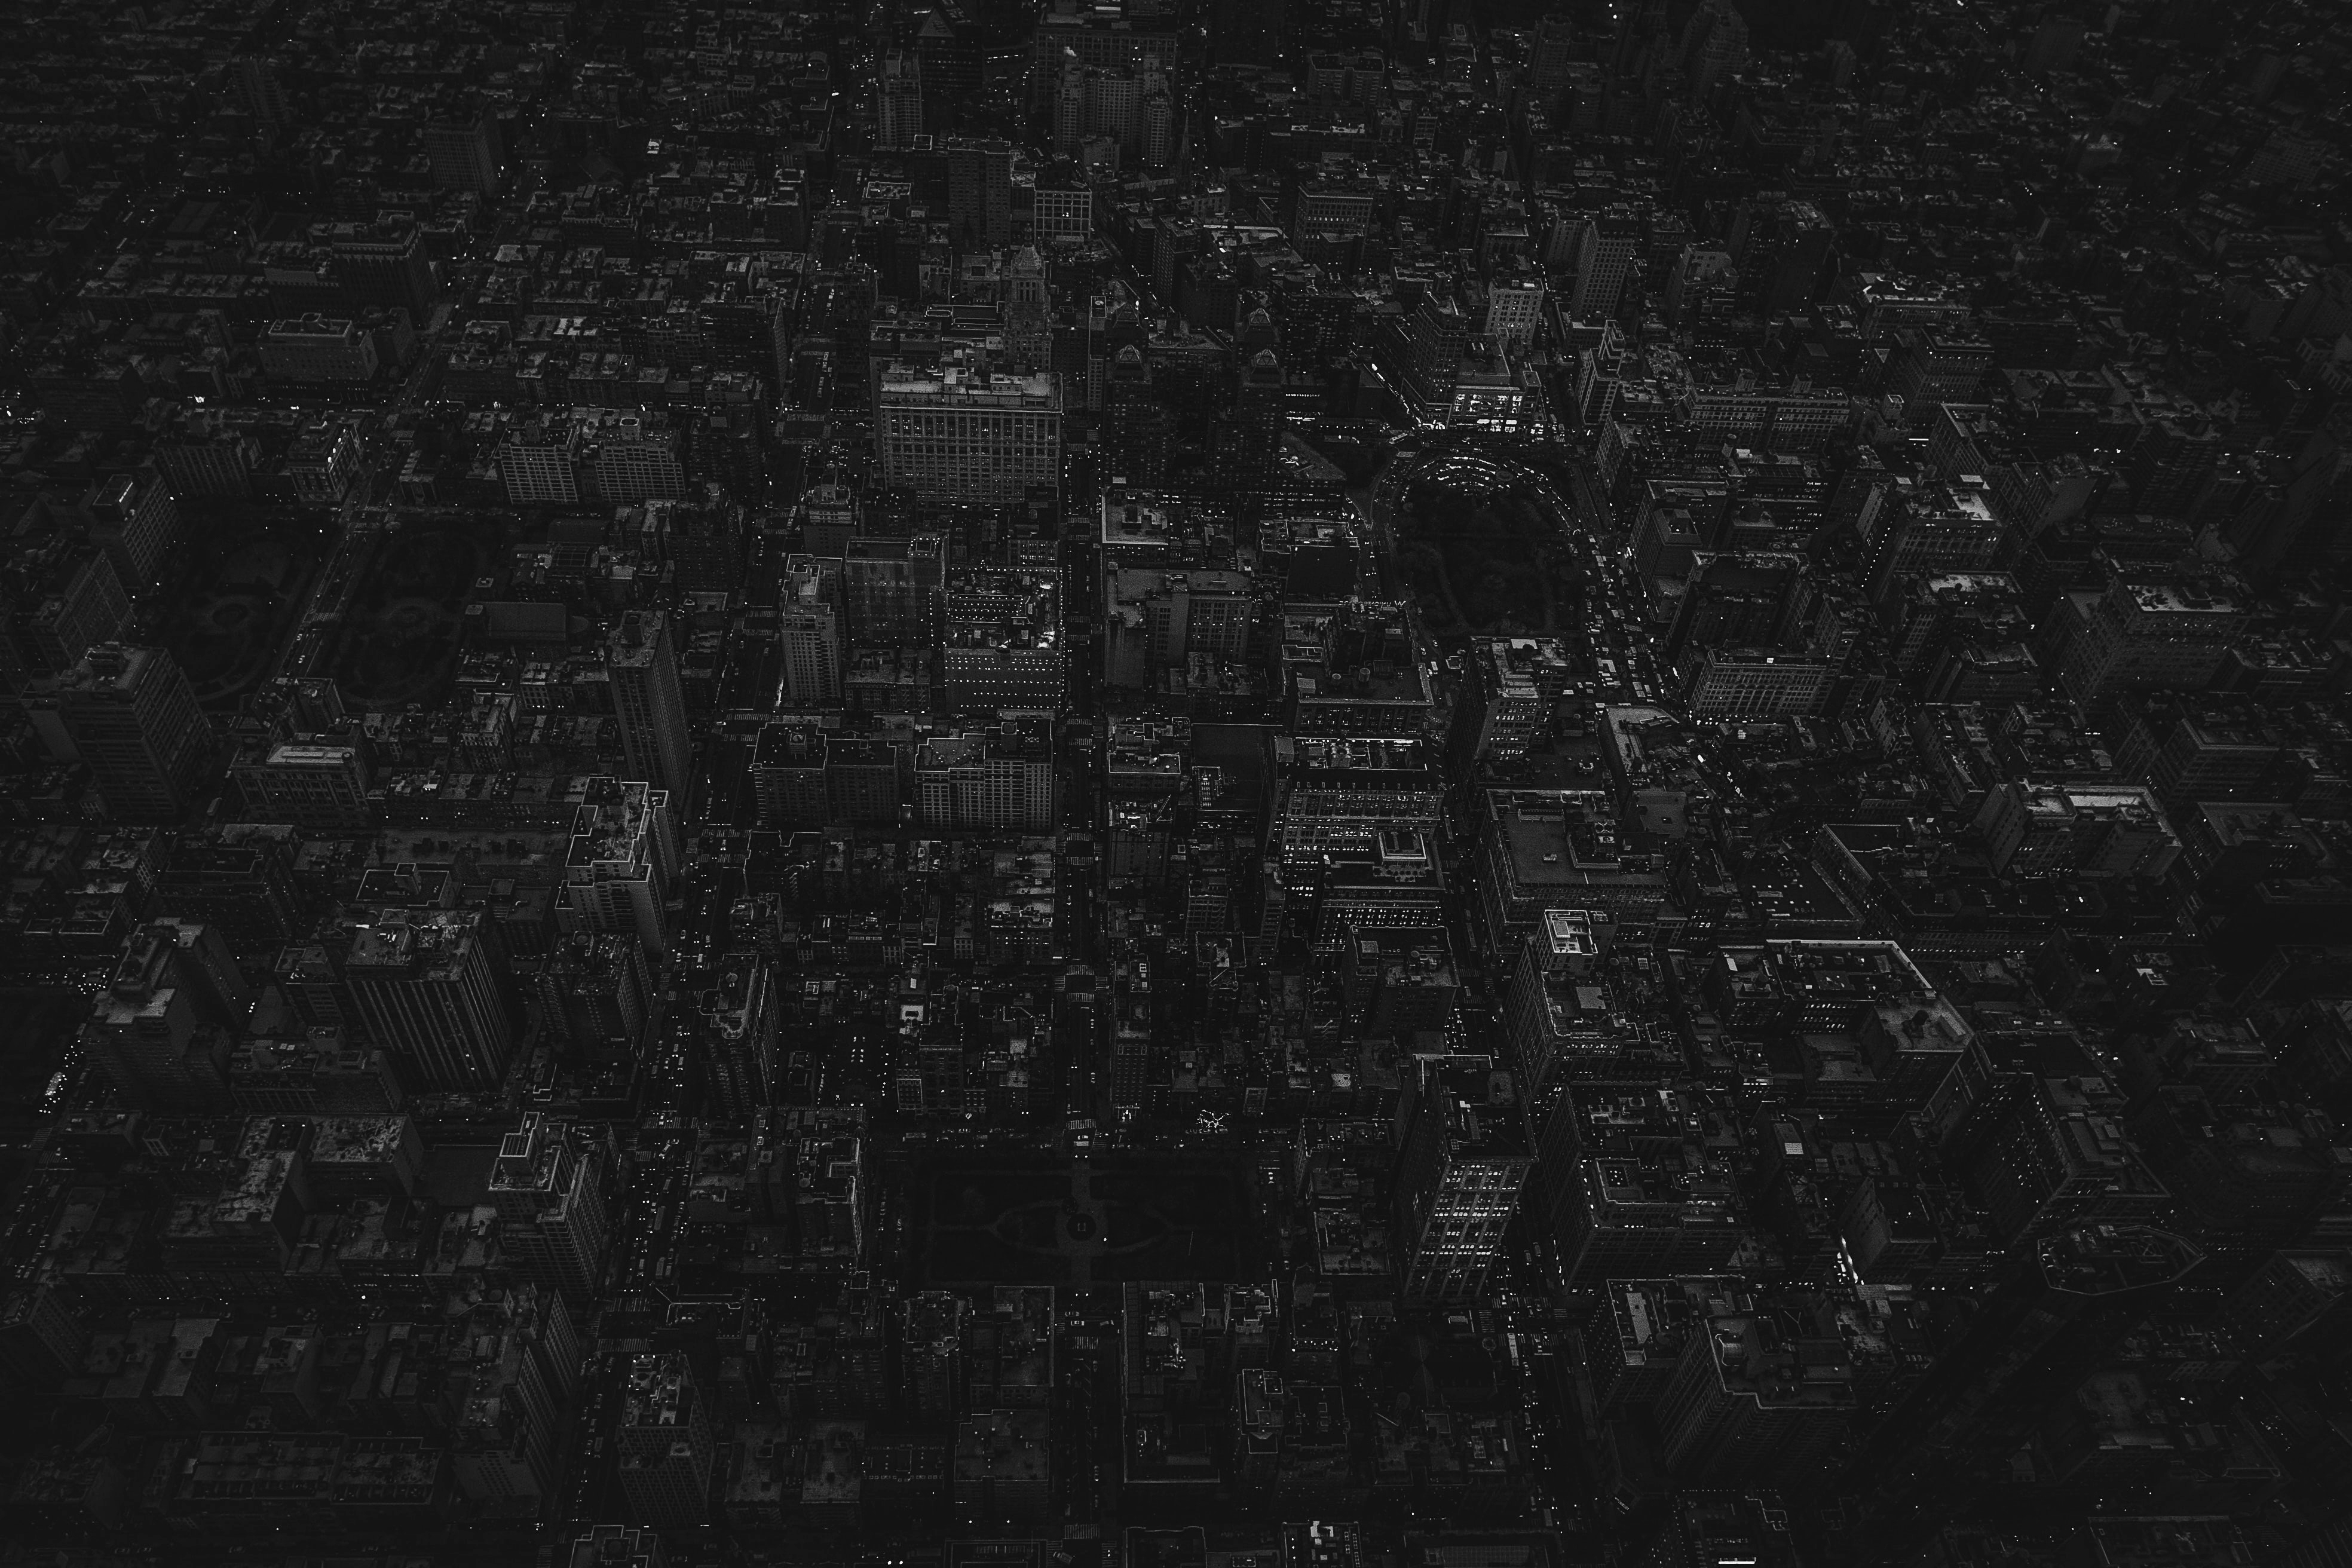 General 3936x2624 Andre Benz monochrome New York City city cityscape drone photo USA aerial view dark rooftops